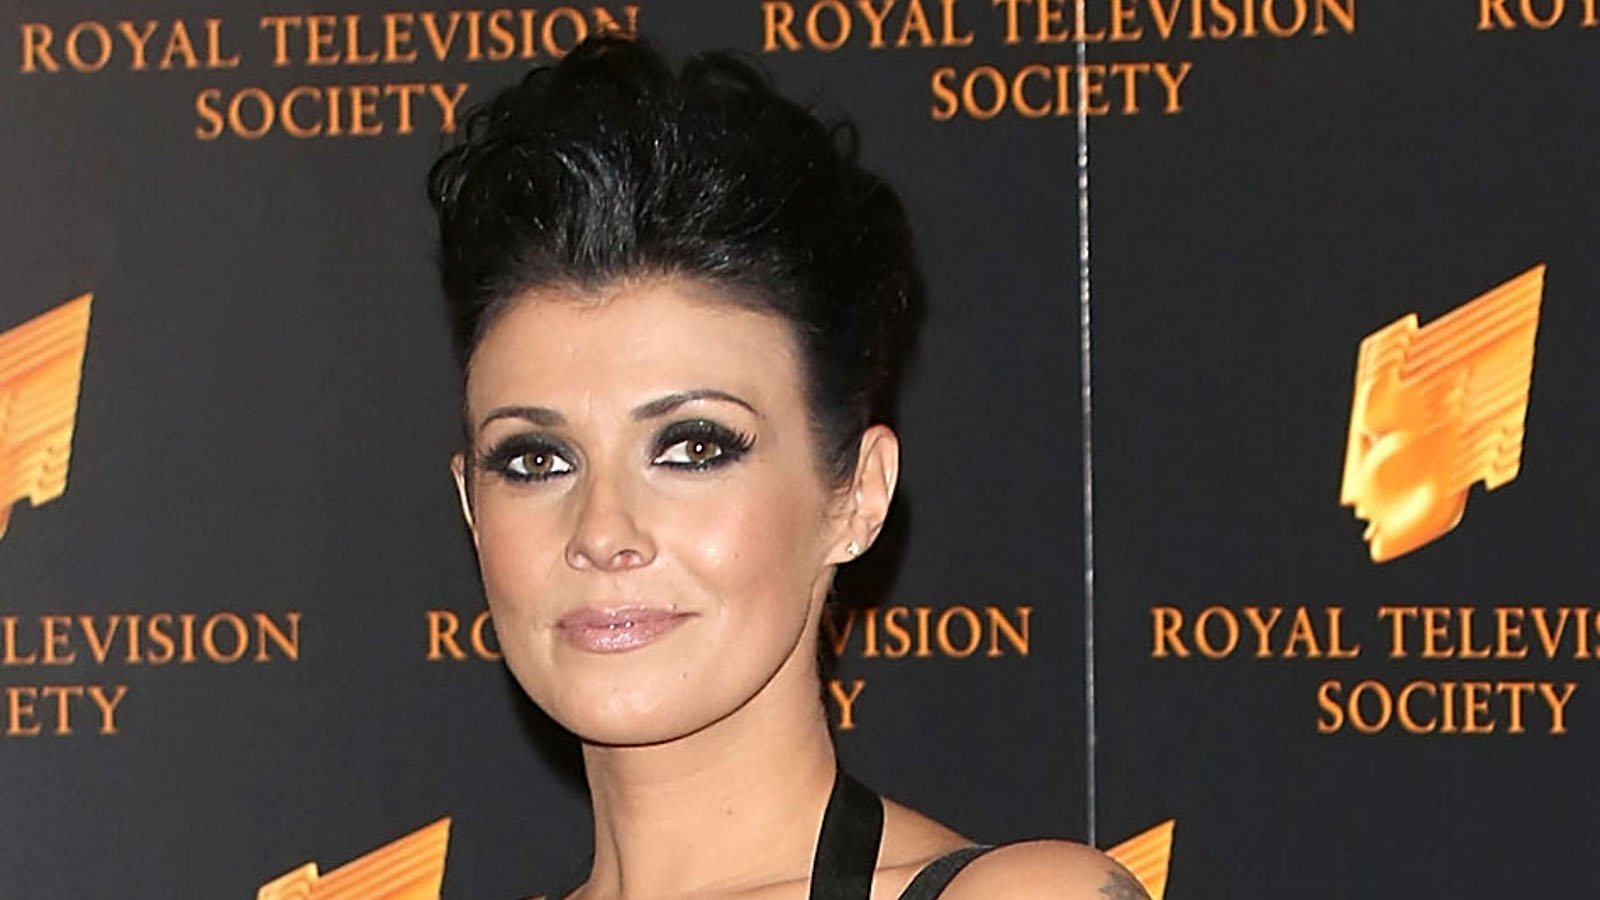 Kym Marsh Horrified By Sex Tape Claims 